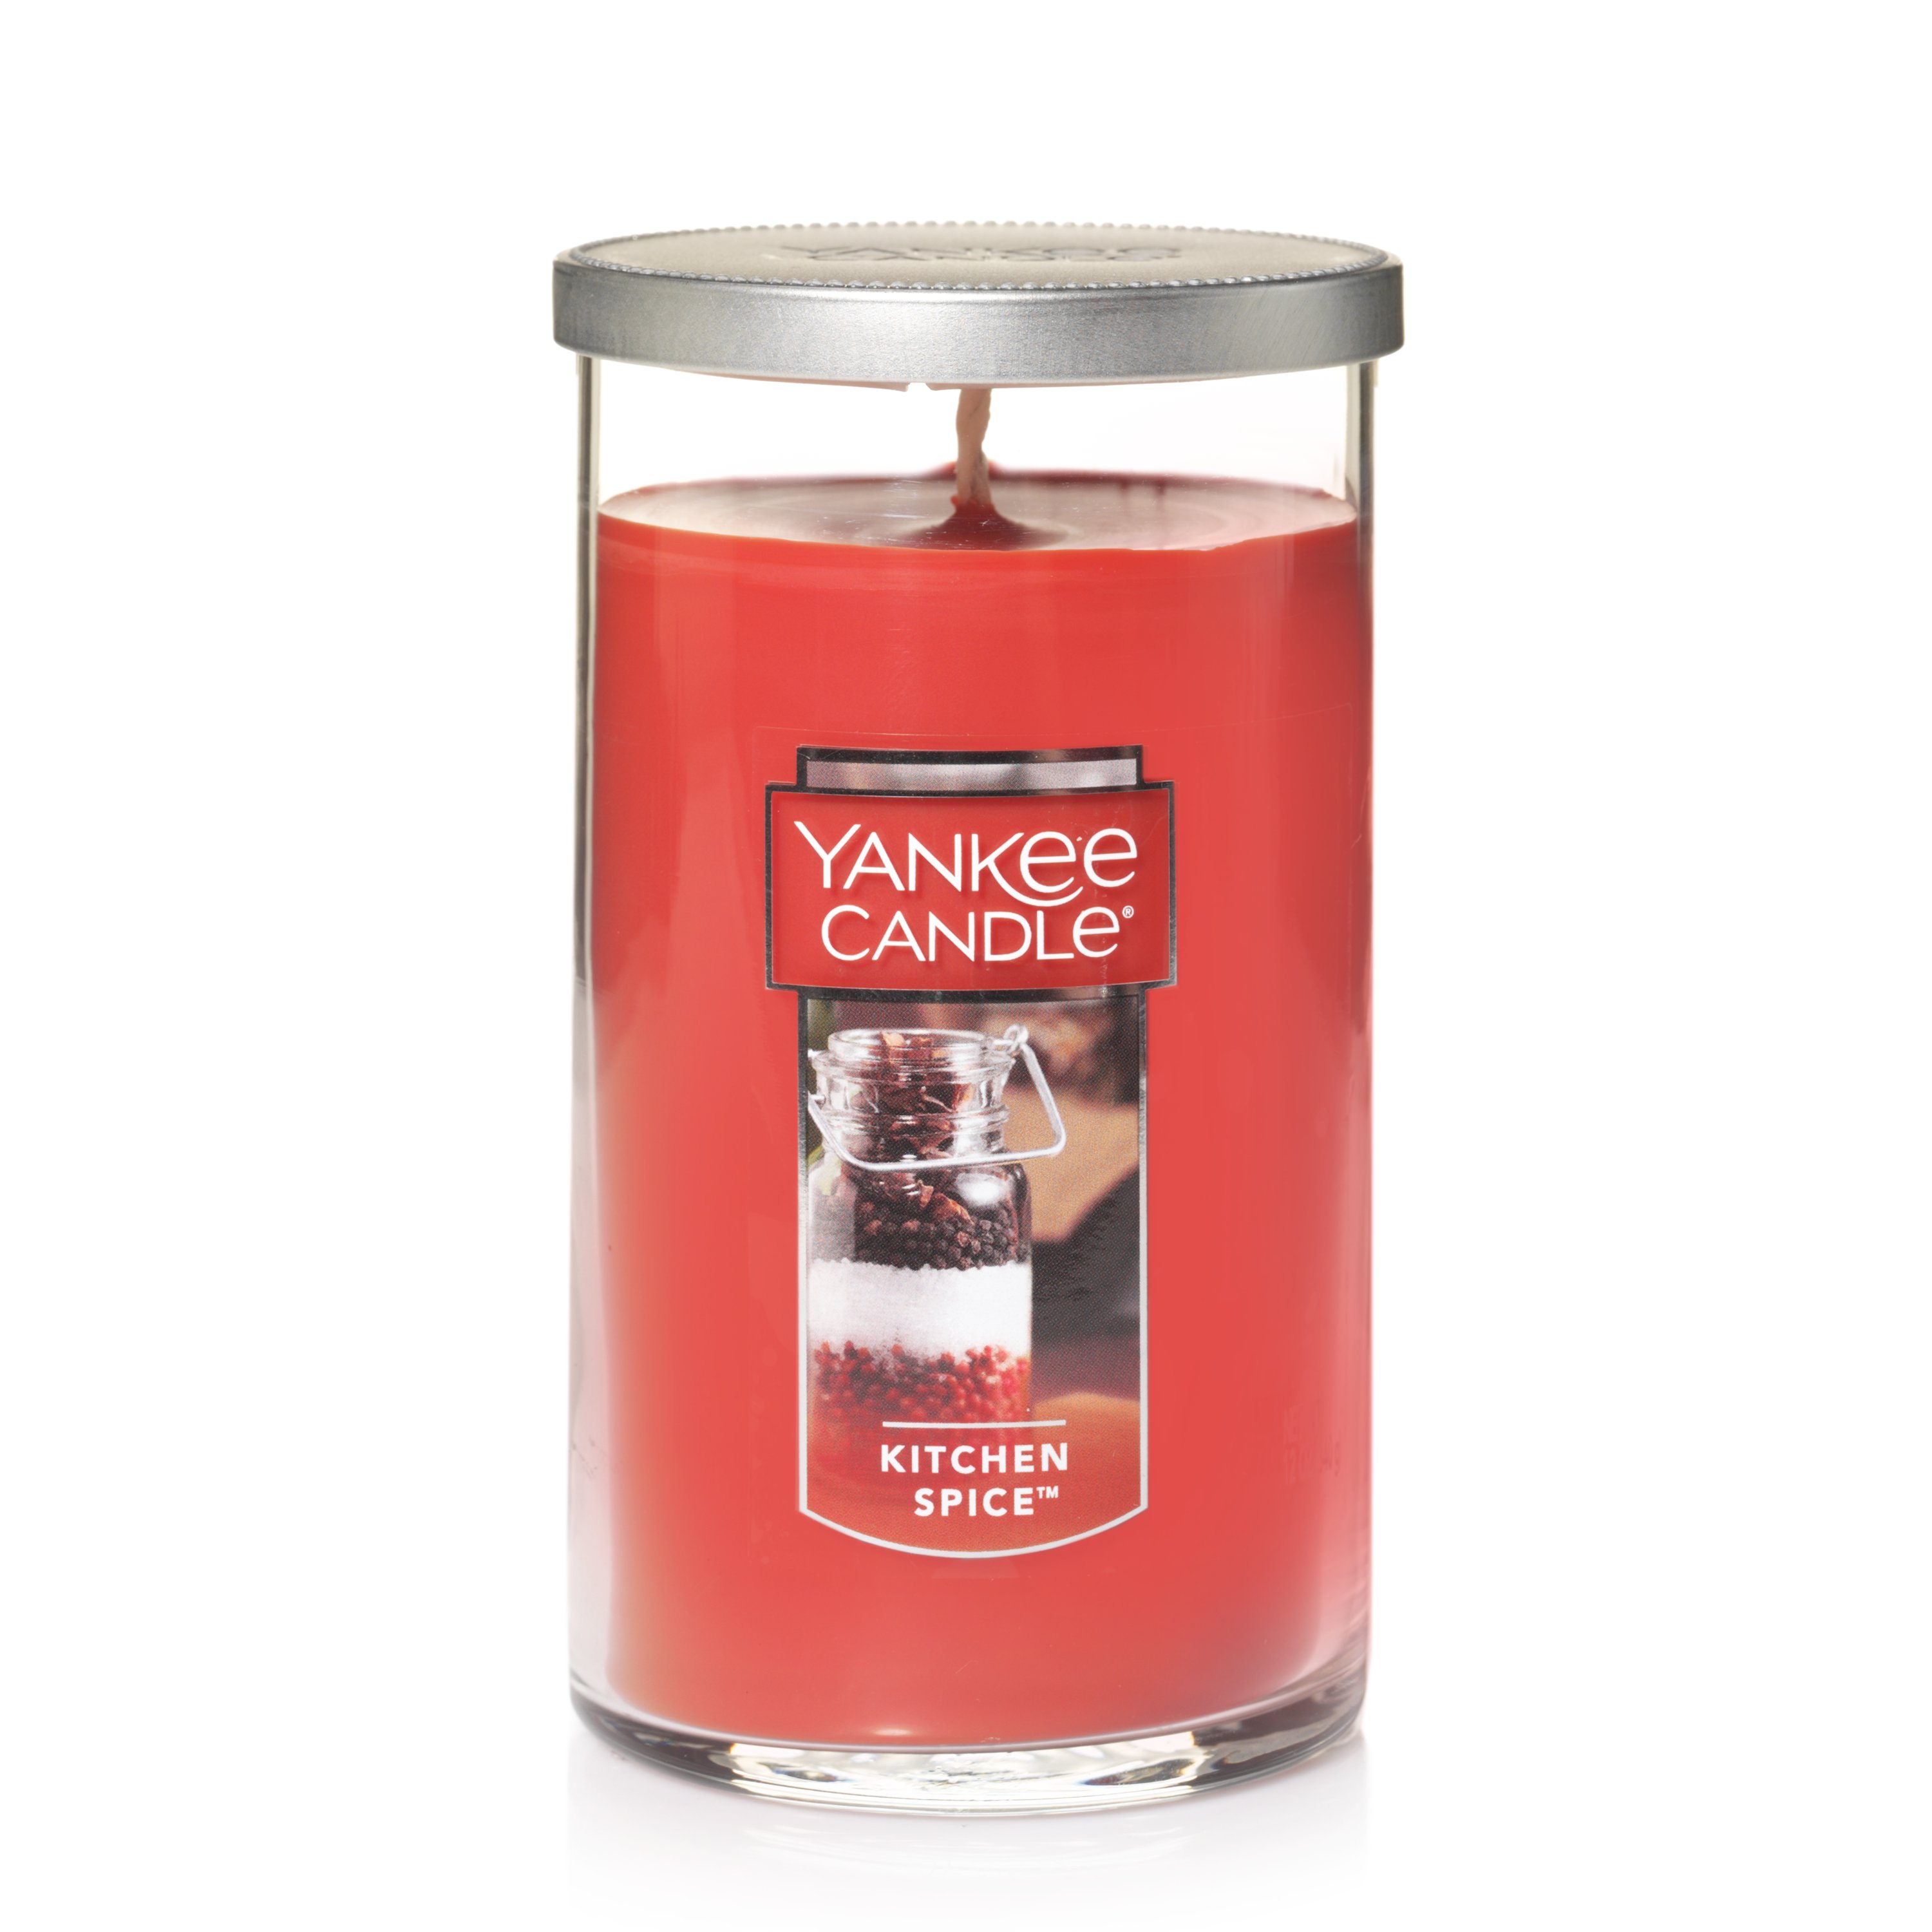  Yankee Candle Set of 2 Kitchen Spice Fragranced Wax